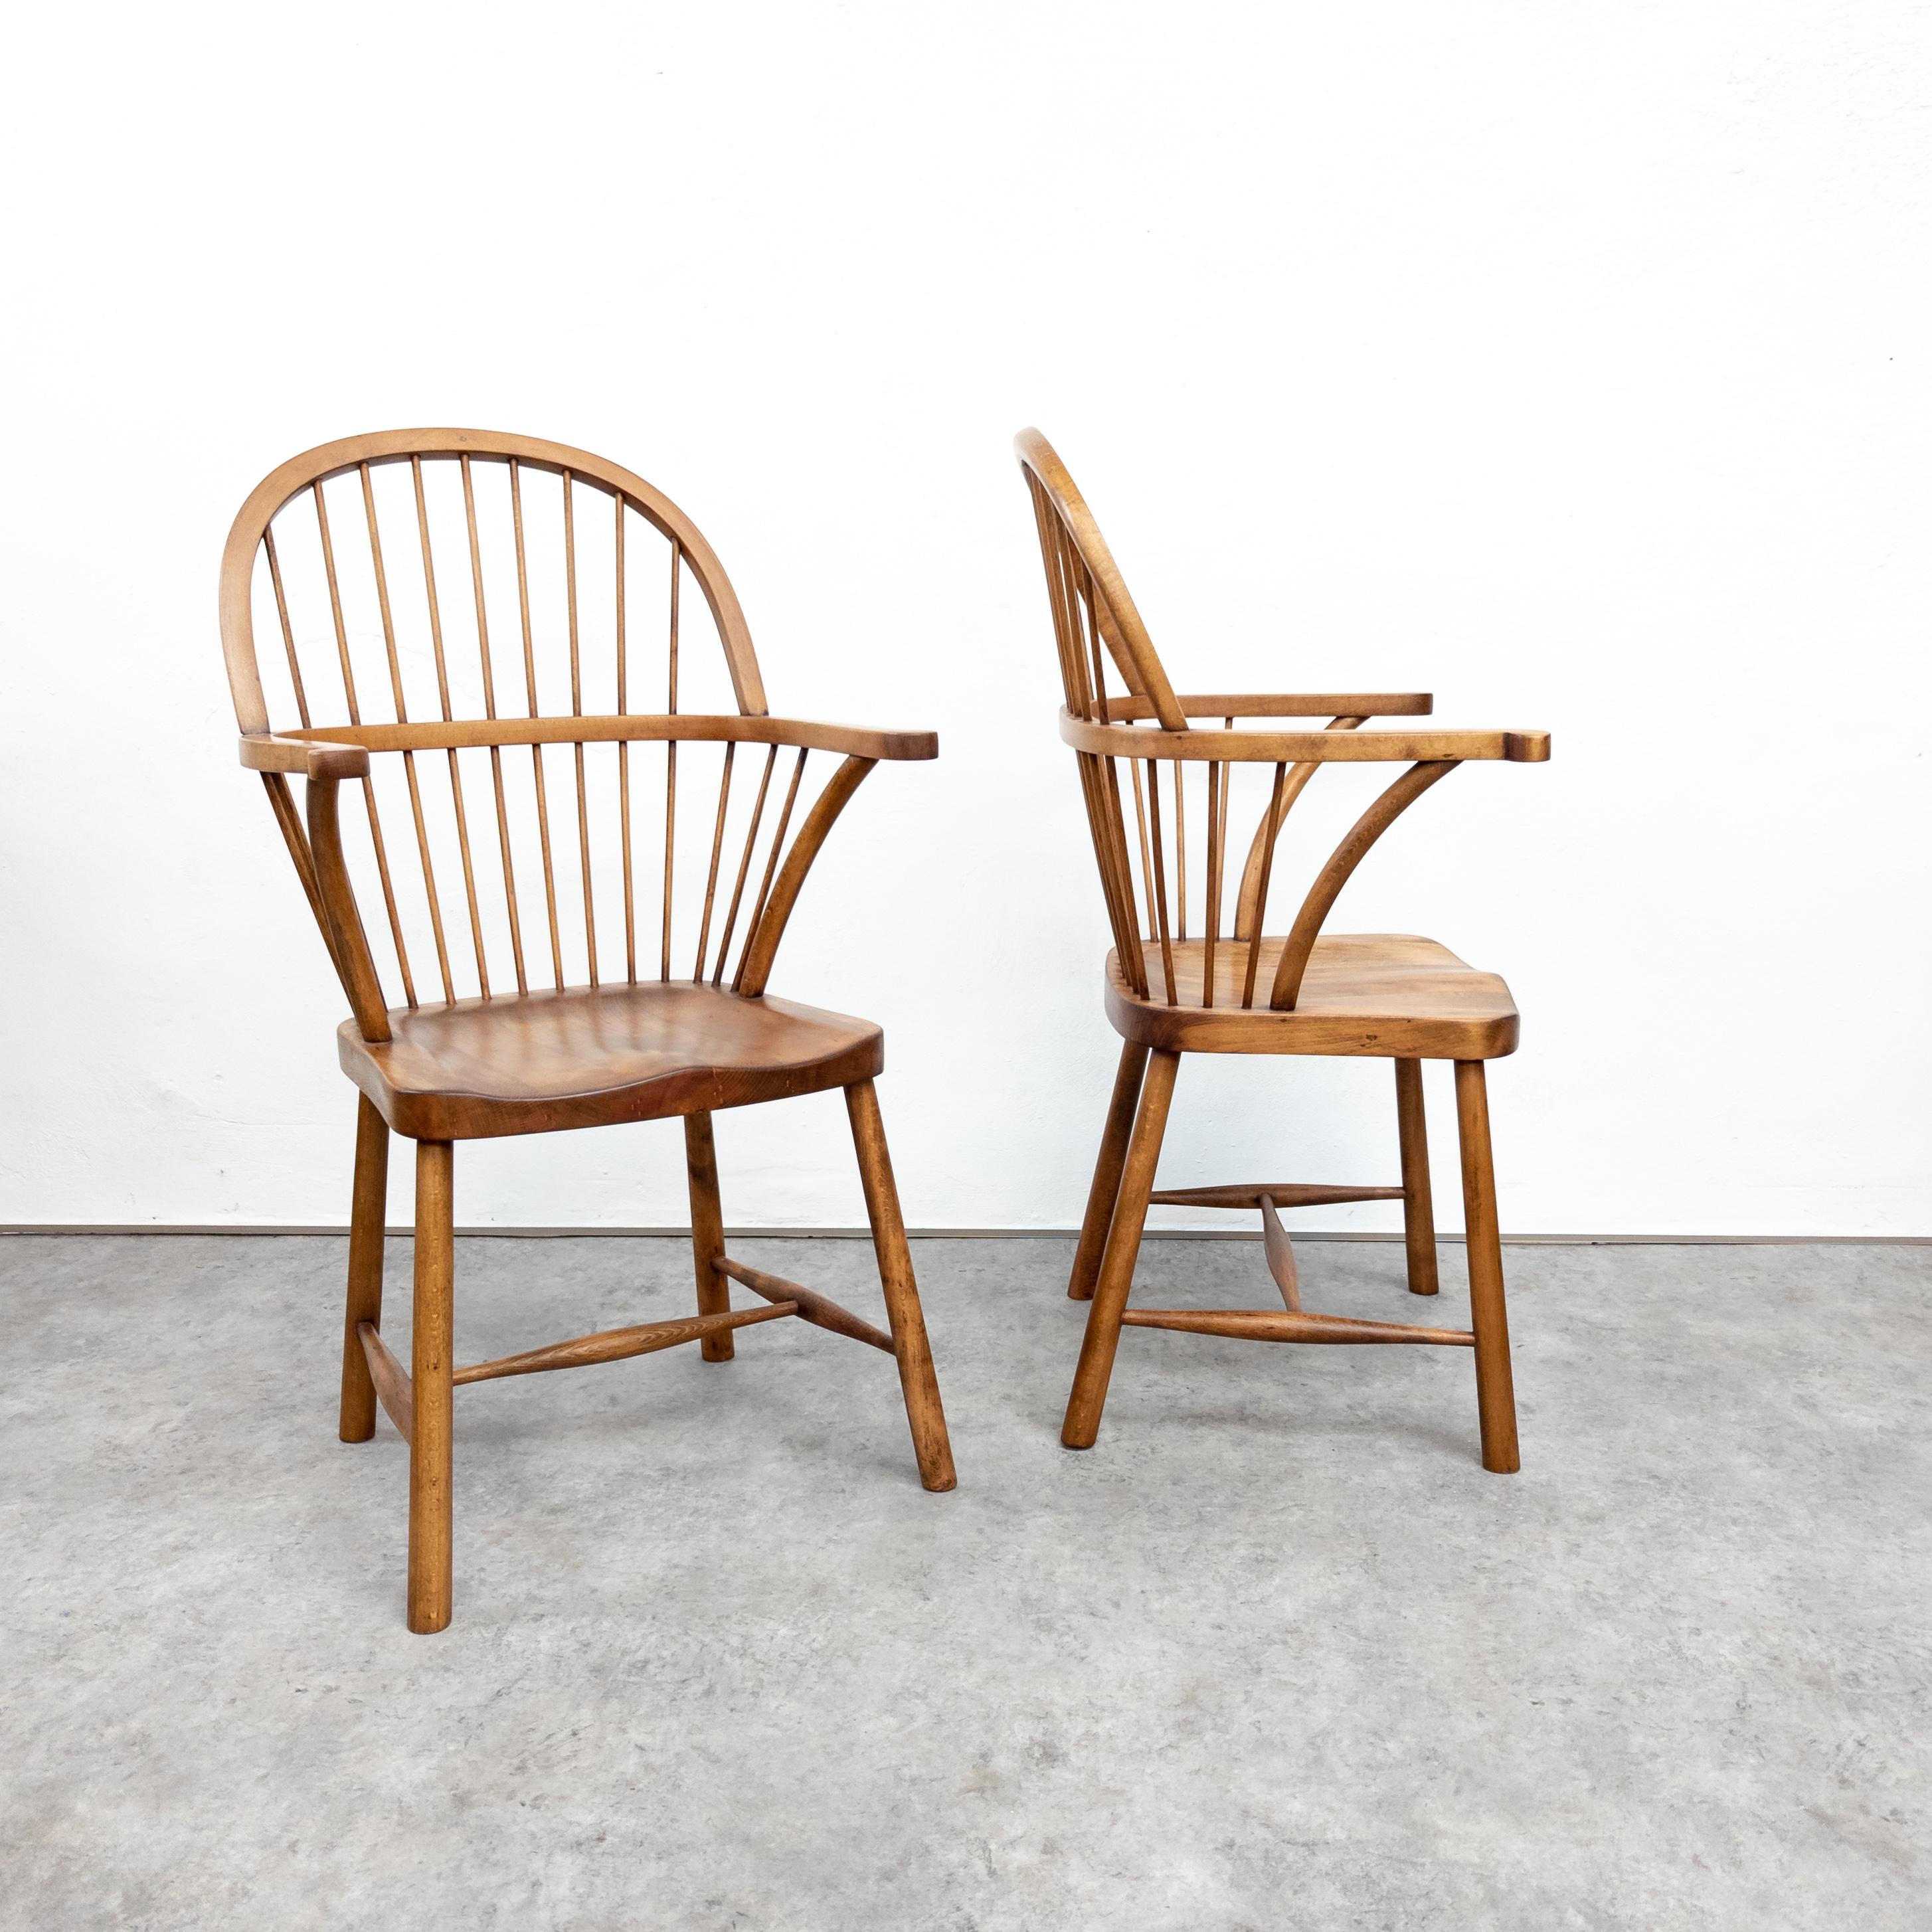 Extremely rare beech wood Windsor-style chairs by Loos Adolf (1870–1933), manufactured by Gebrüder Thonet. Stamped by company trade mark. The authorship attributed to A. Loos in 1903 (chairs used eg. in the interior of his own apartment. Expertly